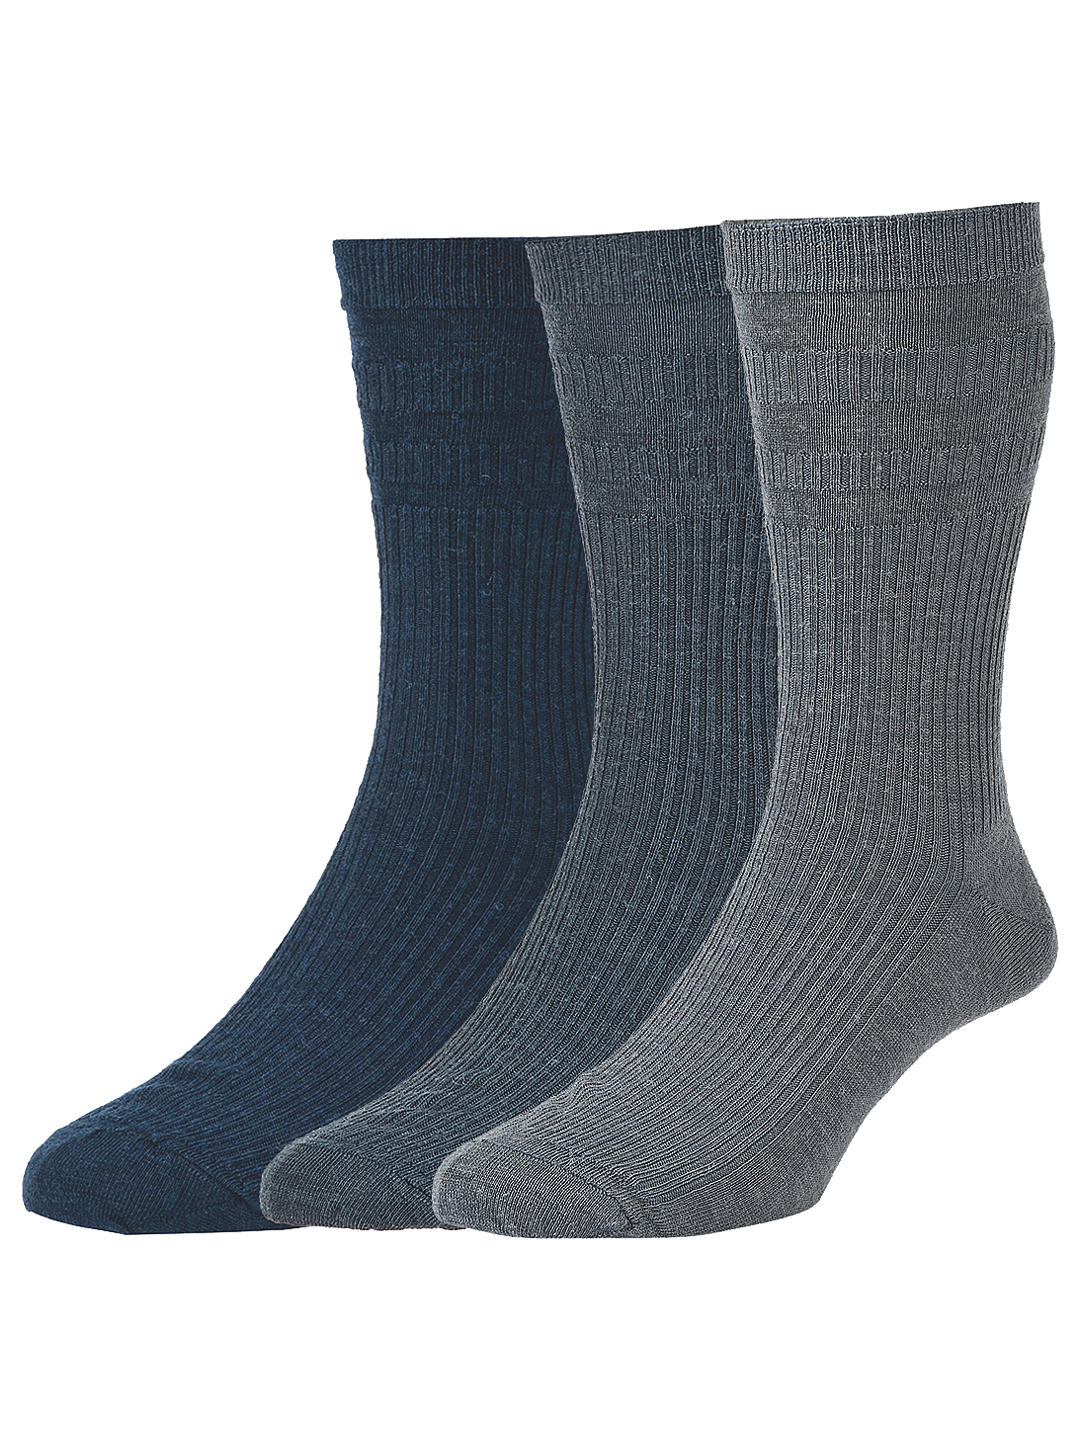 HJ Hall Wool Soft Top Socks, Pack of 3, One Size, Blue Multi